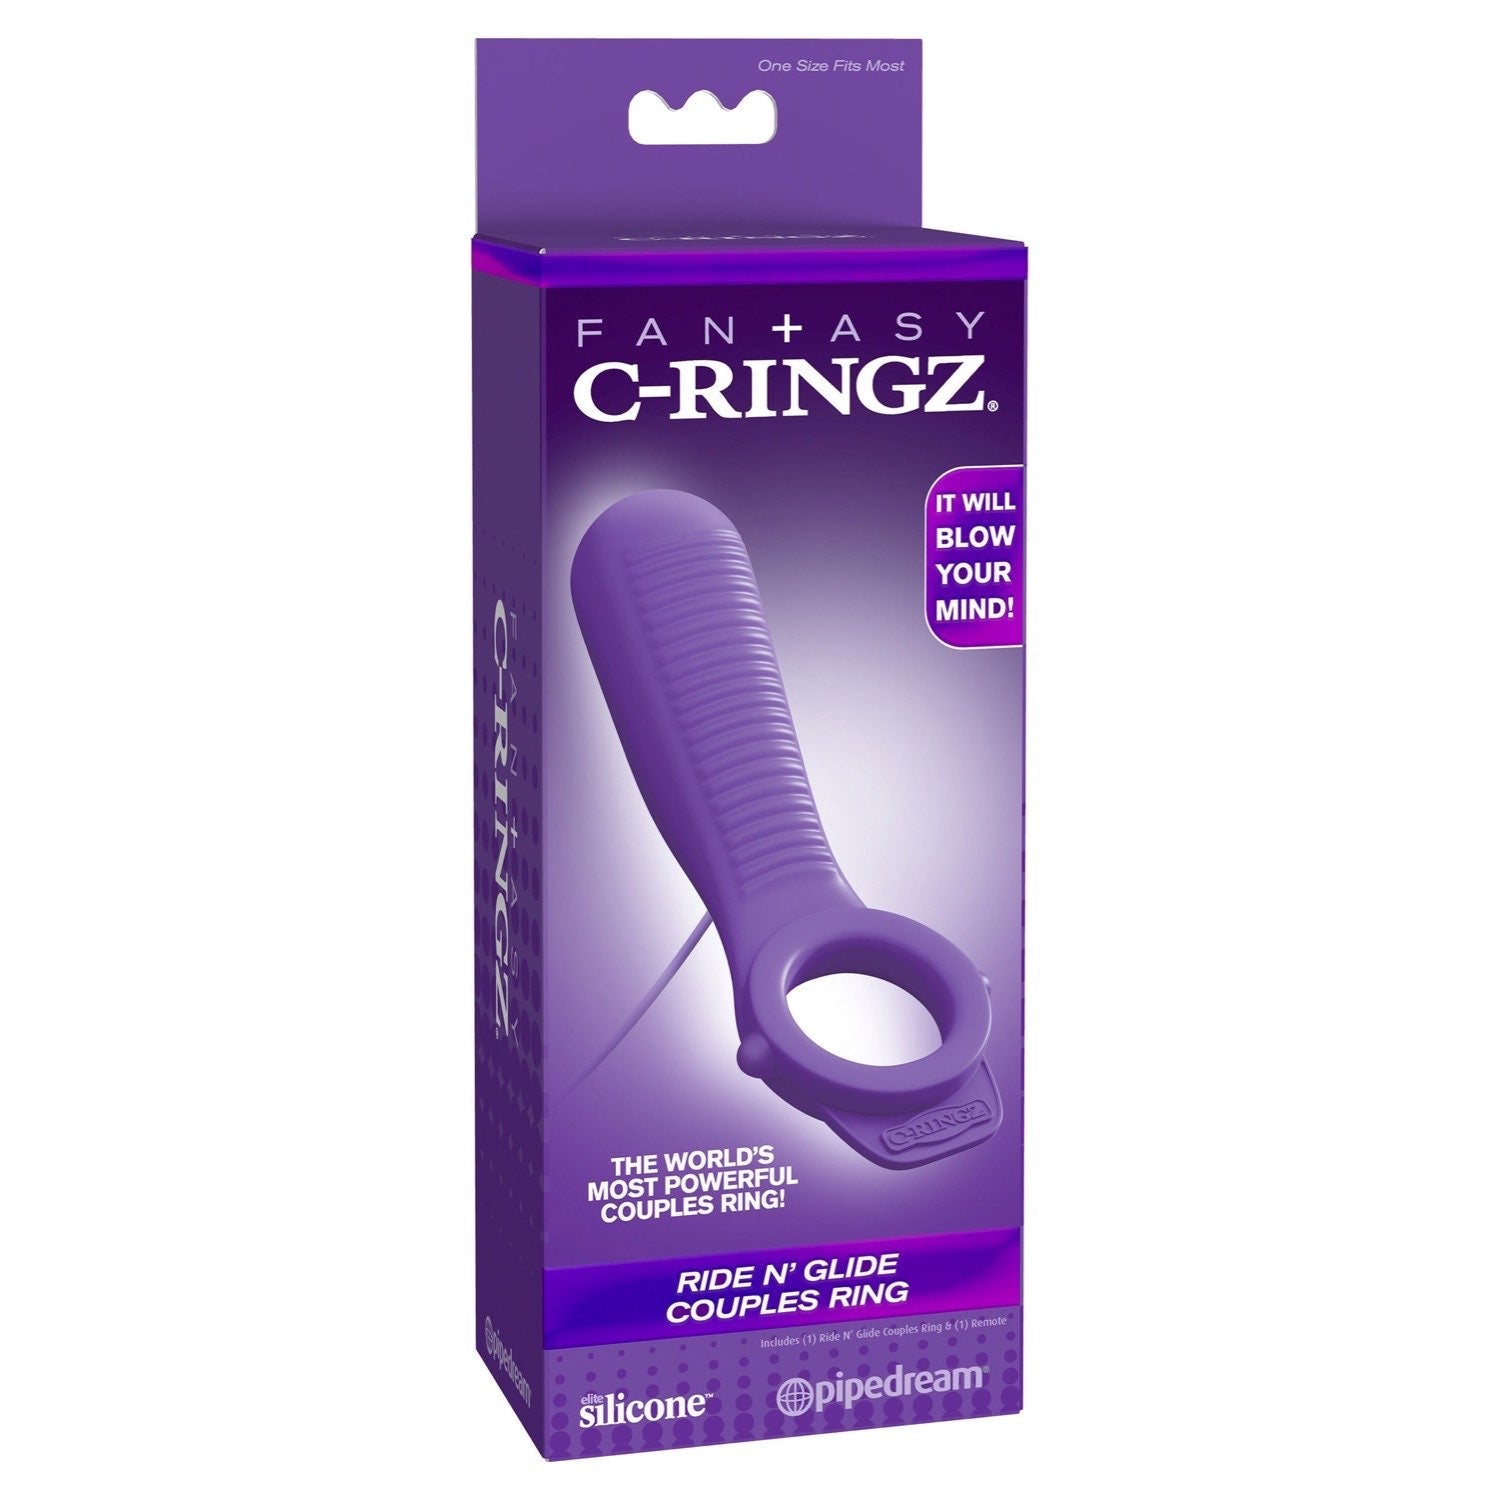 Fantasy C-Ringz Fantasy C-ringz Ride N&#39; Clide Couples Ring - Purple Vibrating Cock Ring by Pipedream